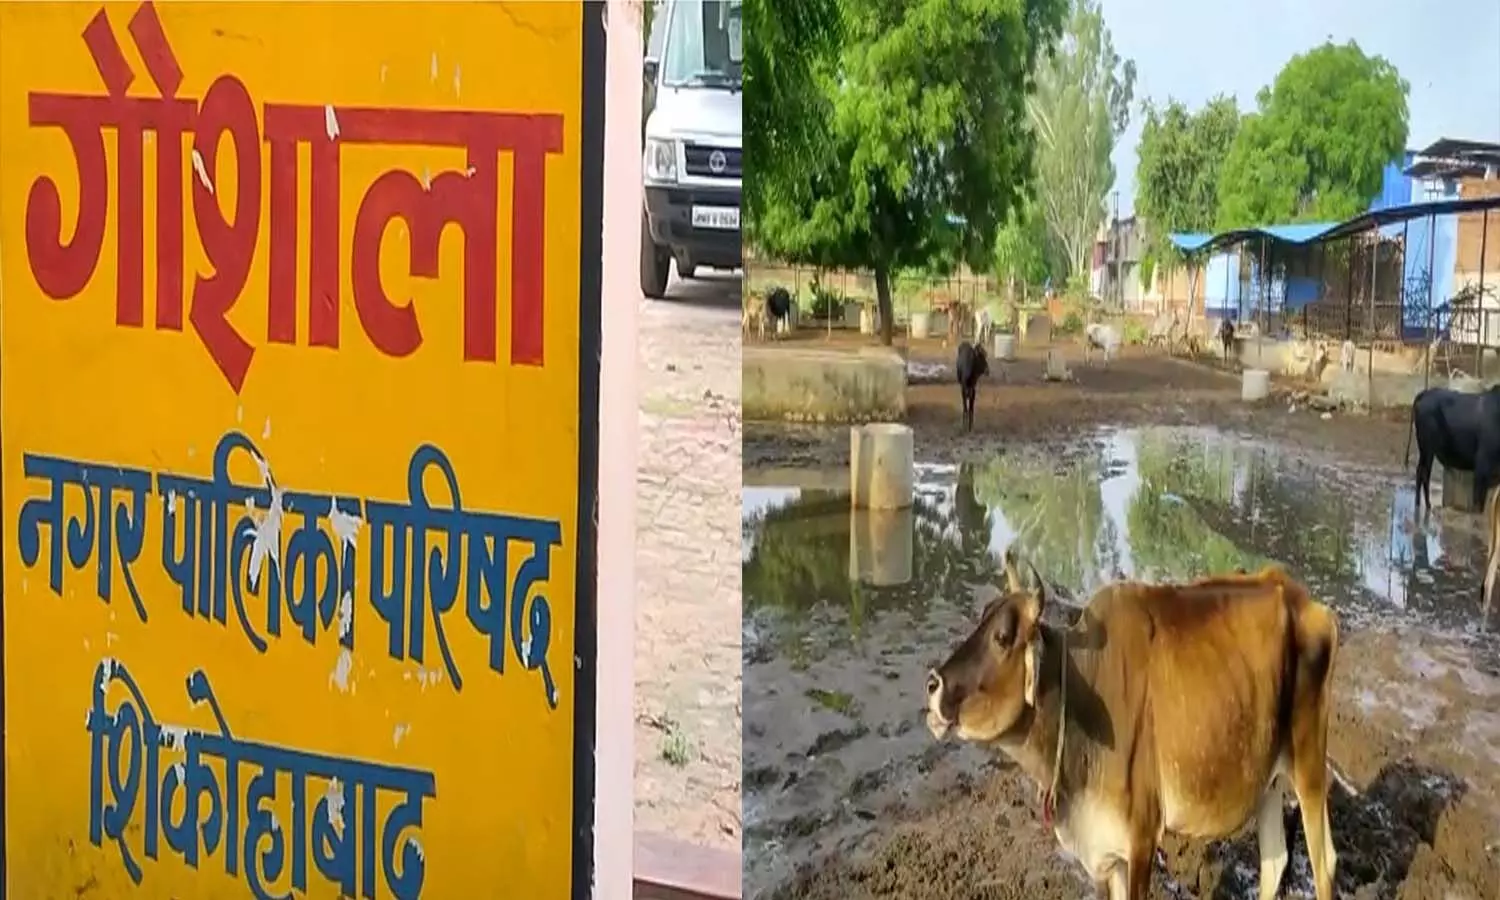 Due to rain, there was waterlogging in the cowshed, a cow died after getting trapped in the mud